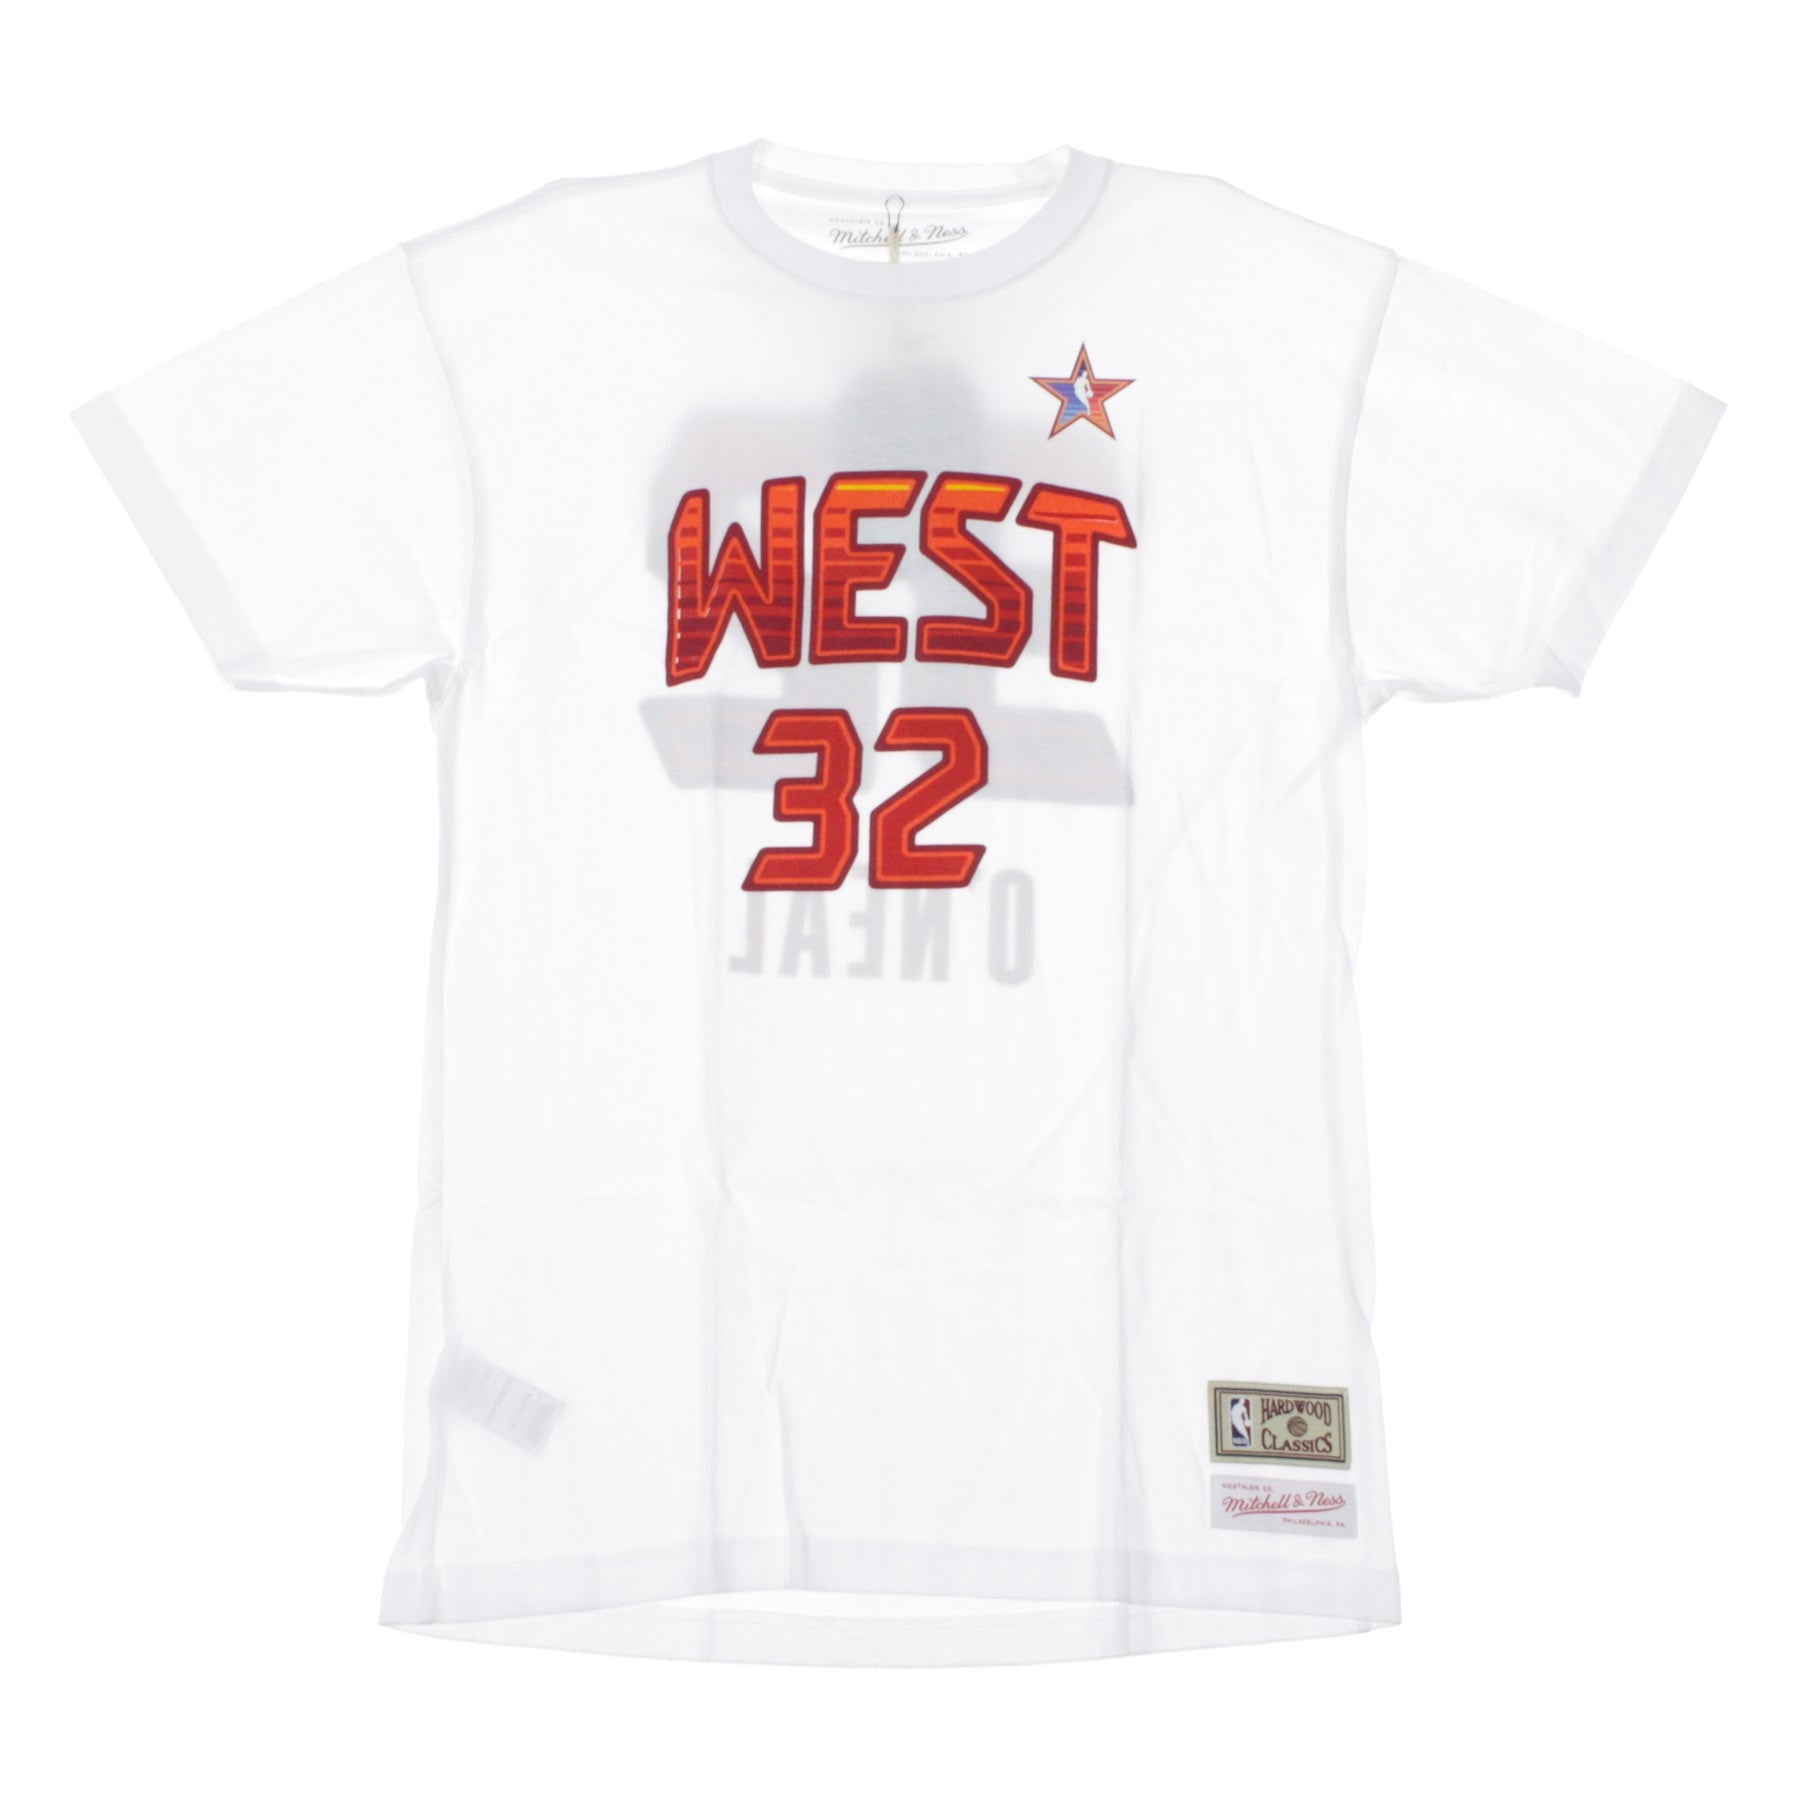 Mitchell & Ness, Maglietta Uomo Nba Name & Number Tee No.32 Shaquille O'neal All Star West 2009, White/original Team Colors